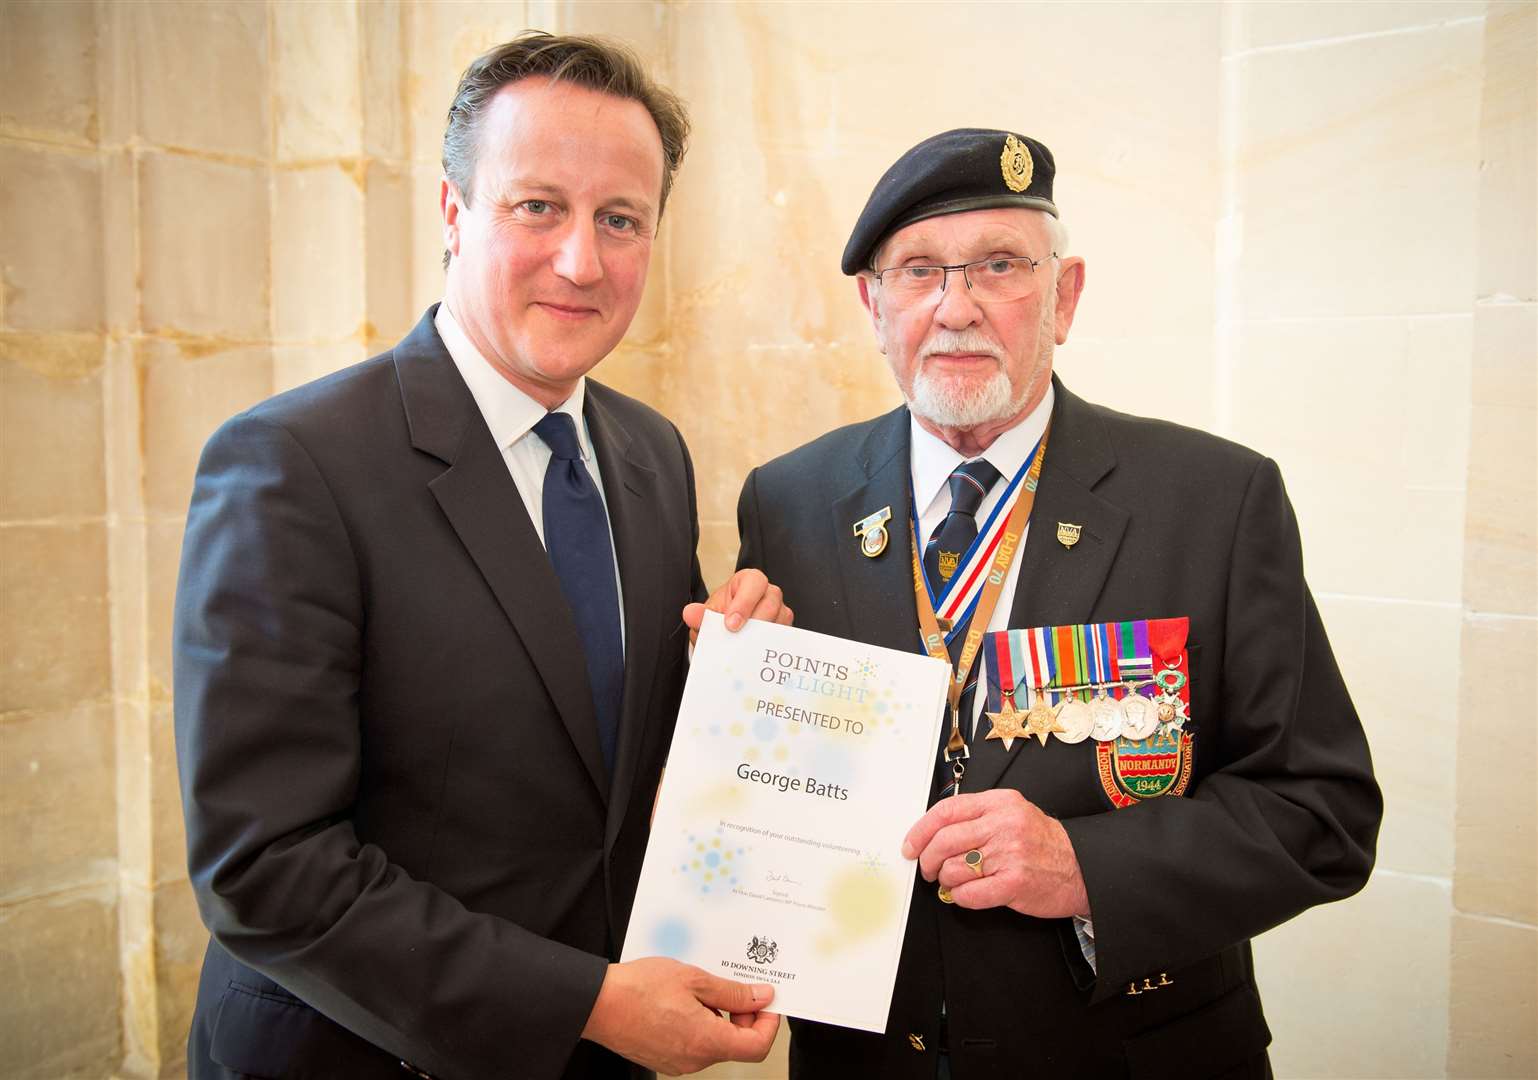 George Batts was honoured with a Point of Light Award by Prime Minister David Cameron in recognition of his voluntary work with D-Day veterans